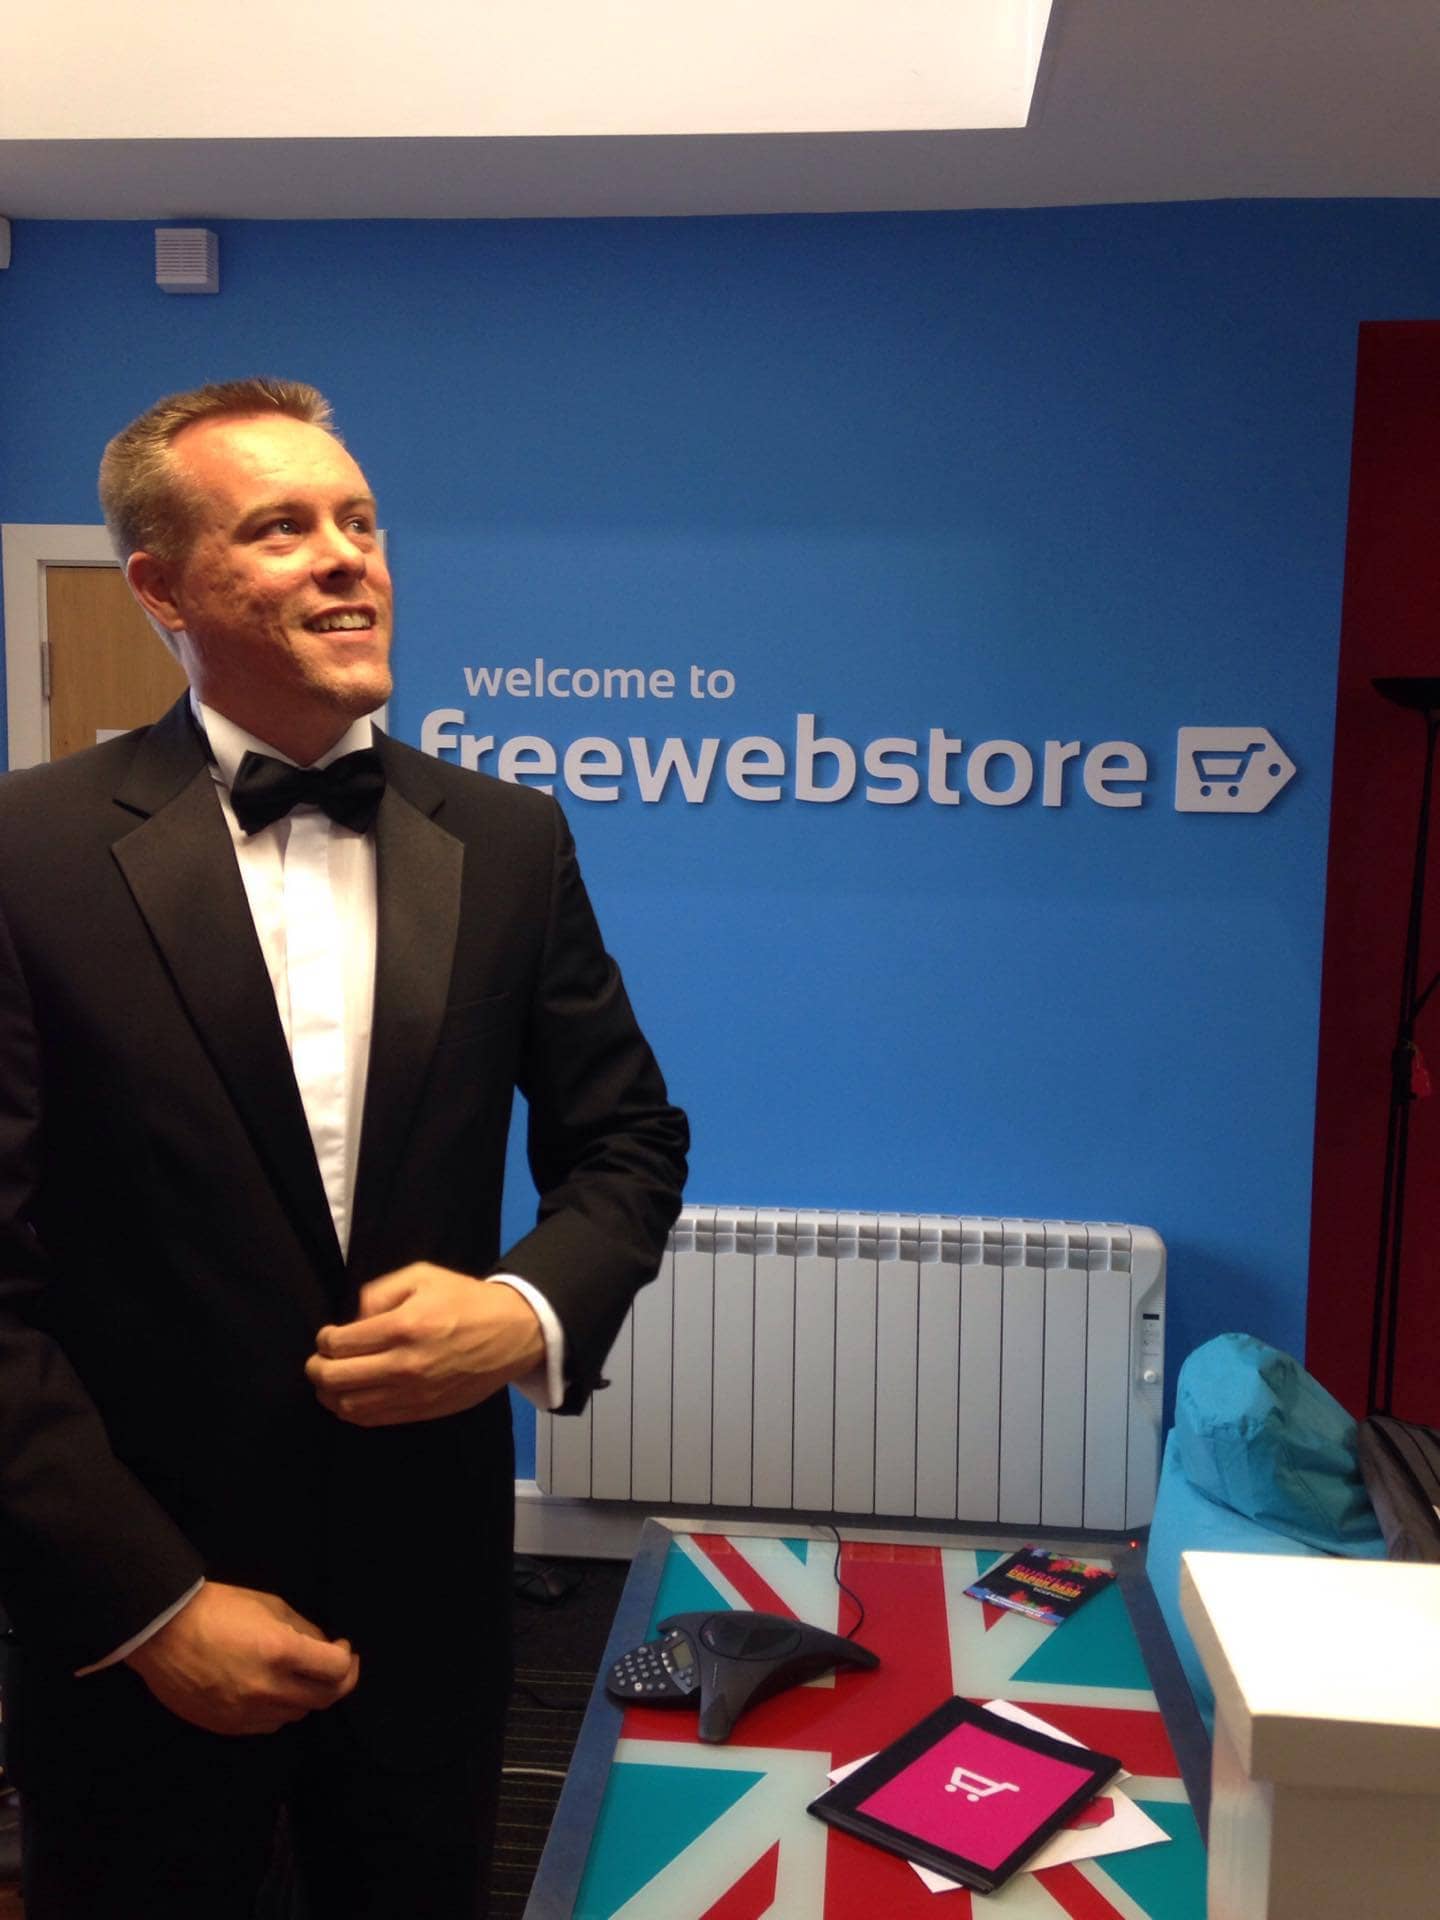 Our CEO Martin, doing his best James Bond impression